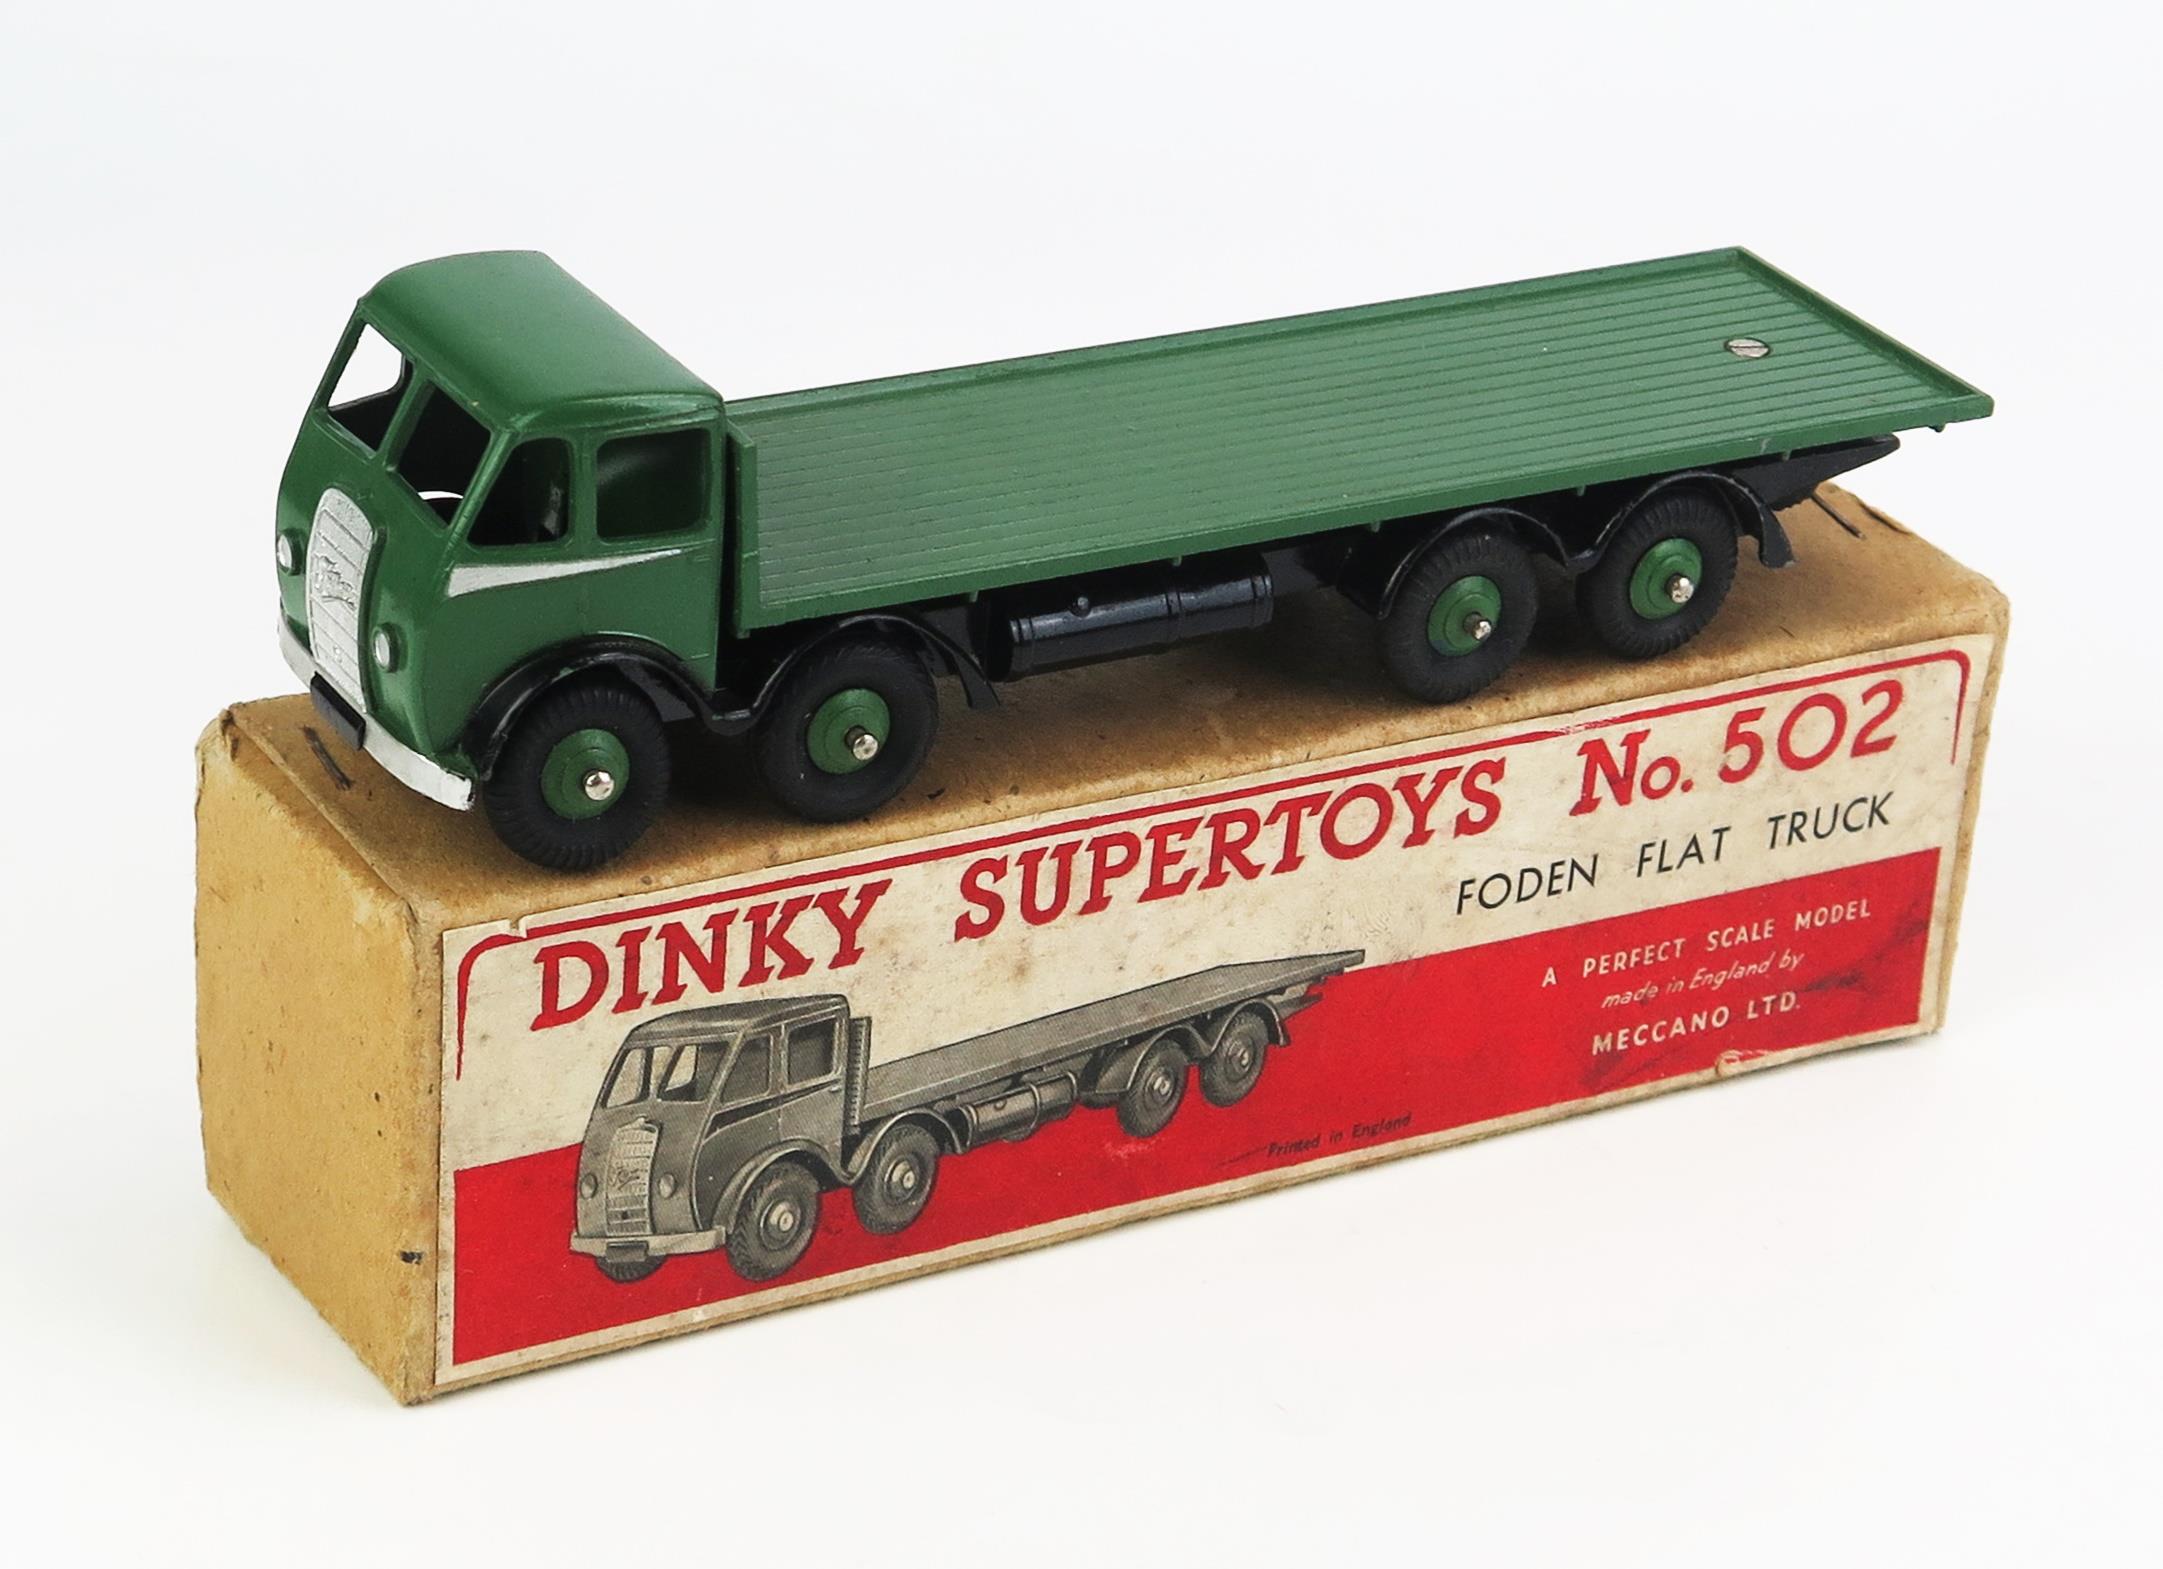 Dinky 502 Foden Flat Truck - dark green cab, back and ridged hubs, silver flash, black chassis,